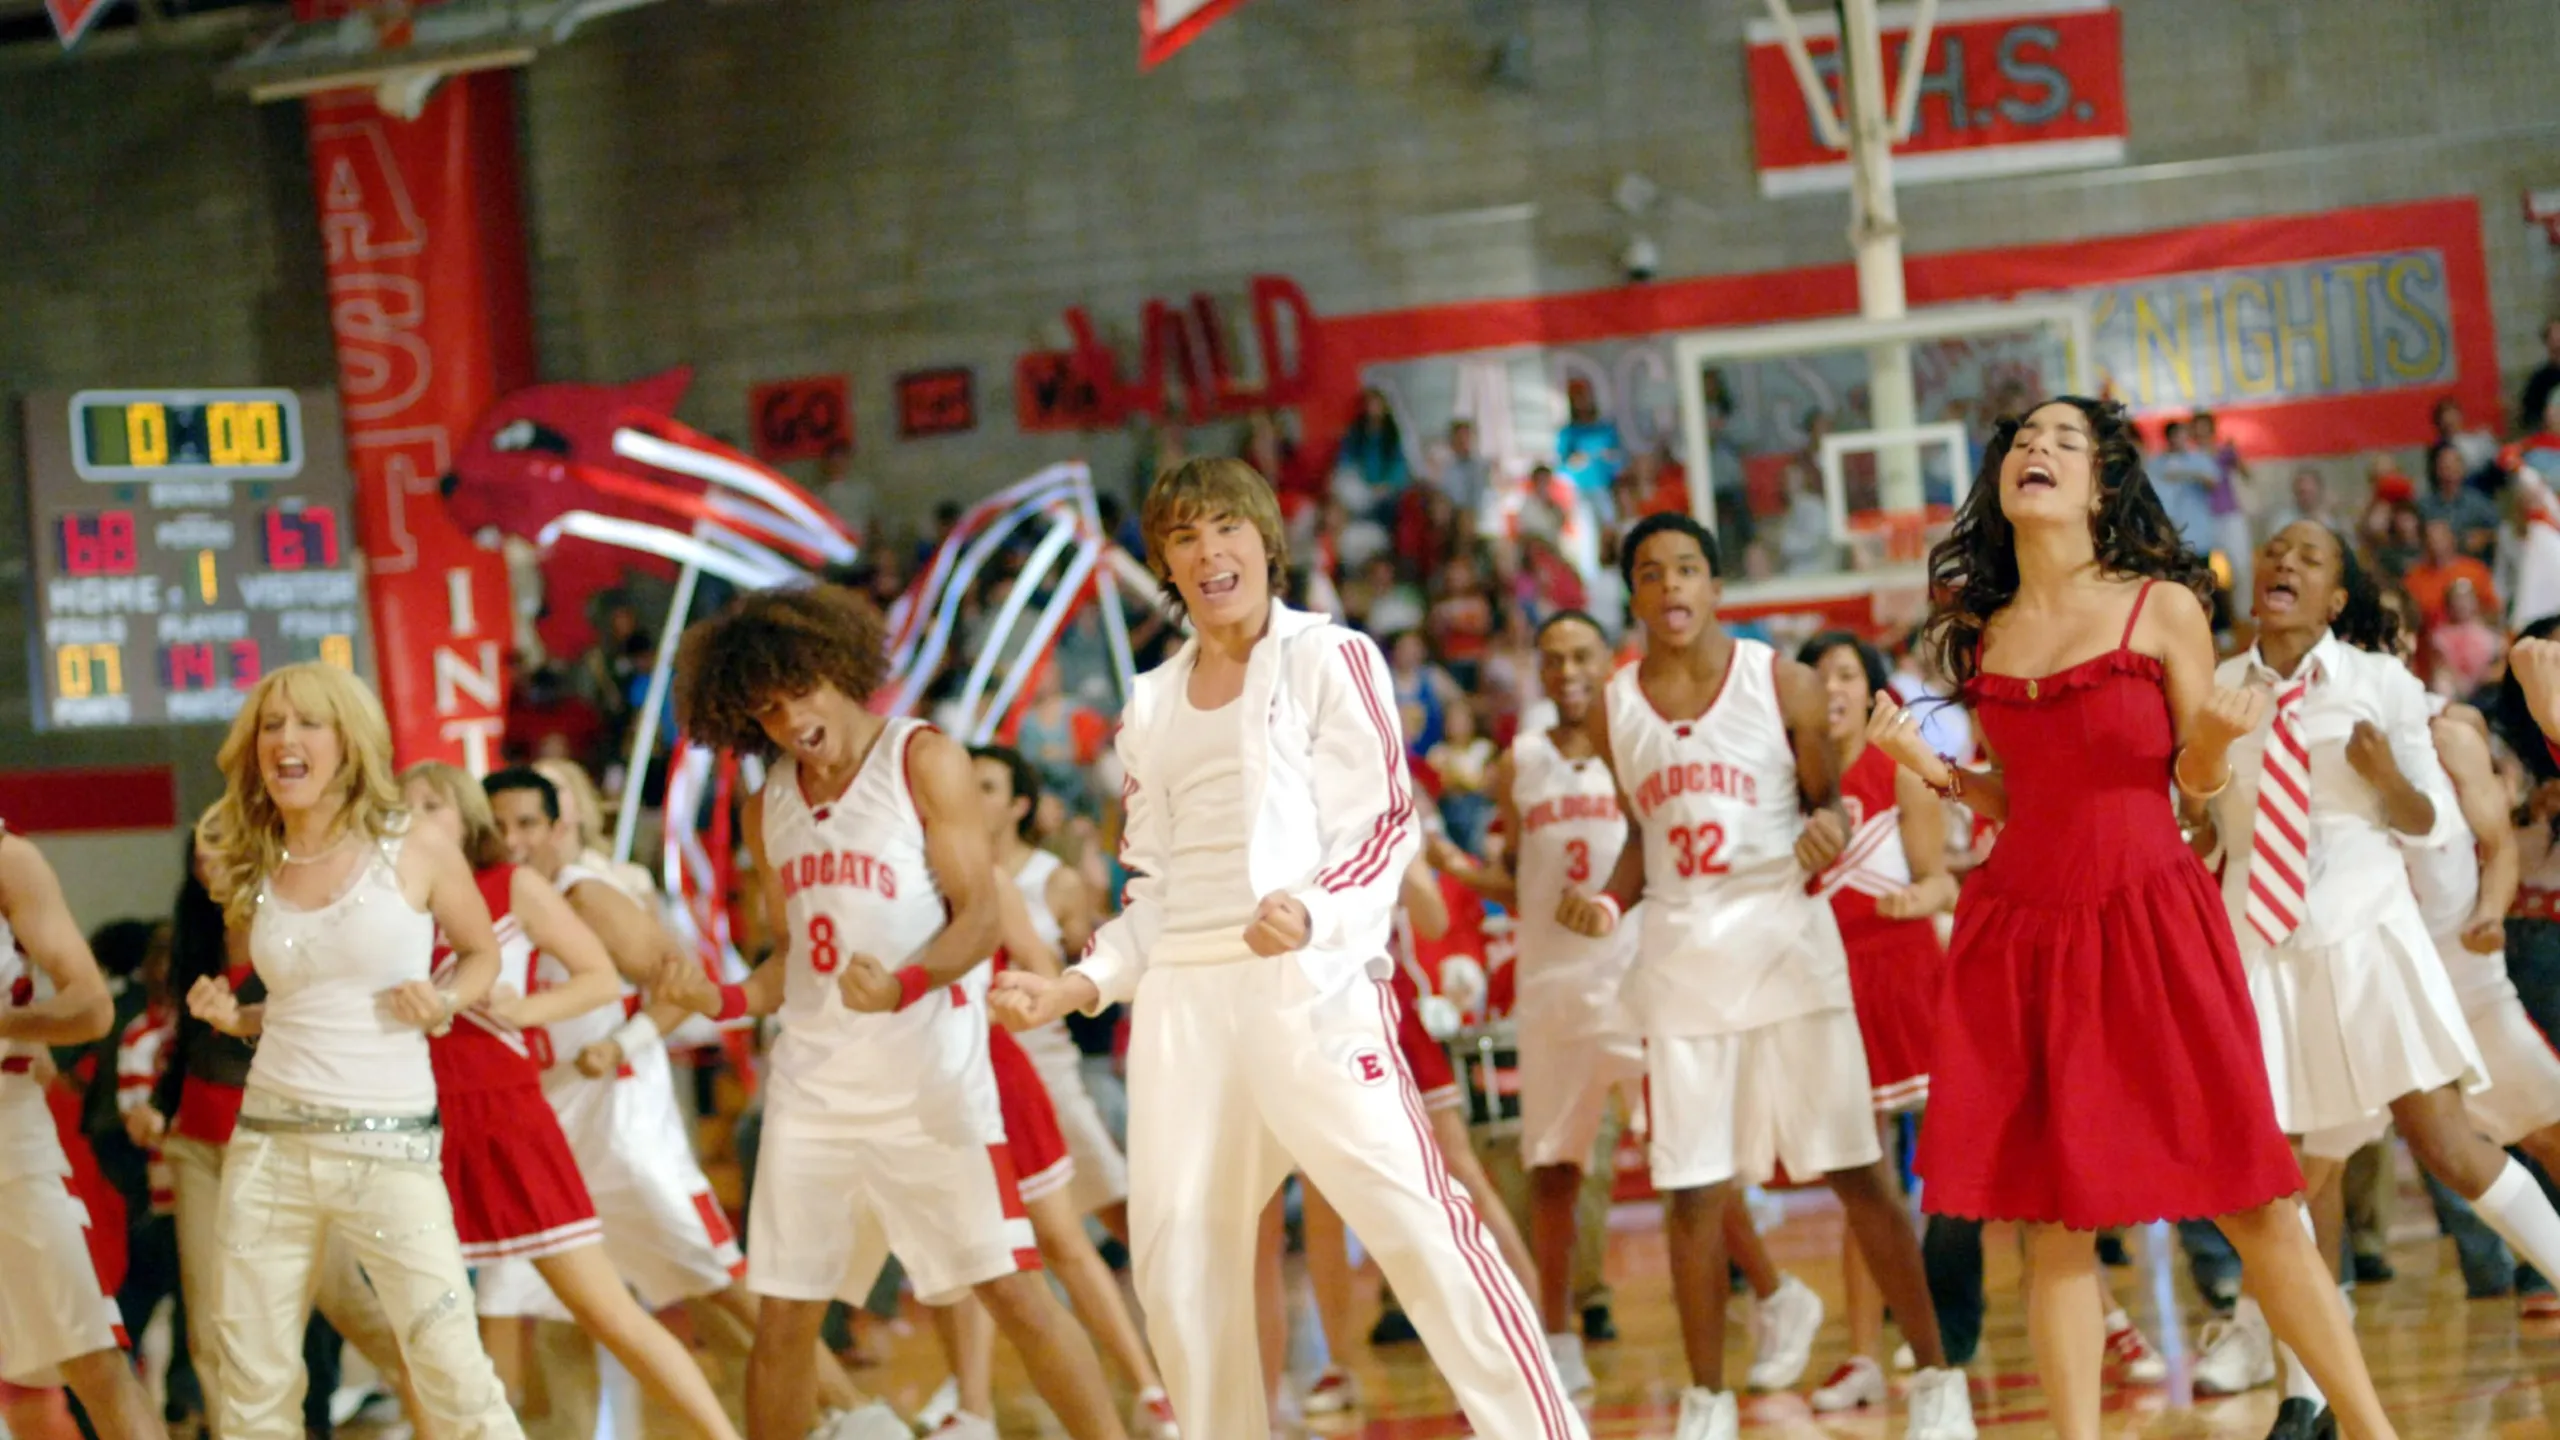 A scene filmed at East High Gymnasium in Utah for High School Musical (Credits: Disney Channel)